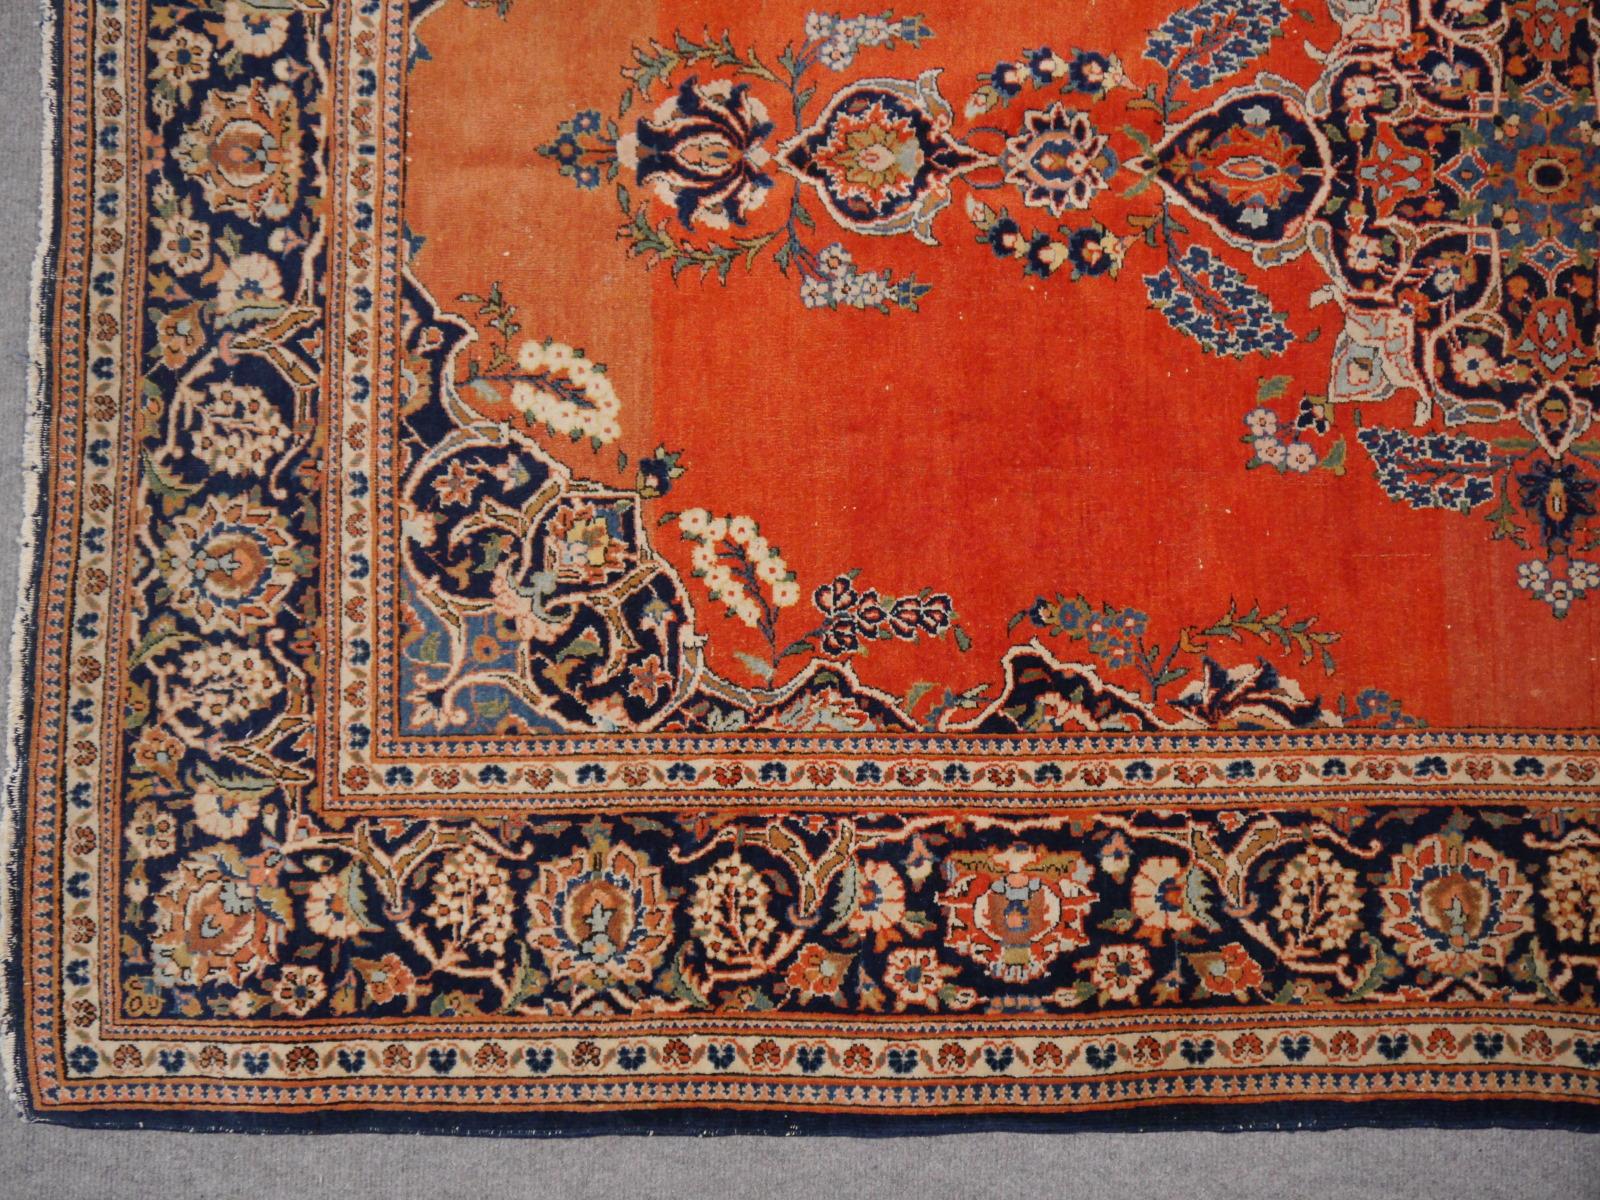 Kashan vintage rug, hand-knotted in salmon and blue - Djoharian Collection In Good Condition For Sale In Lohr, Bavaria, DE